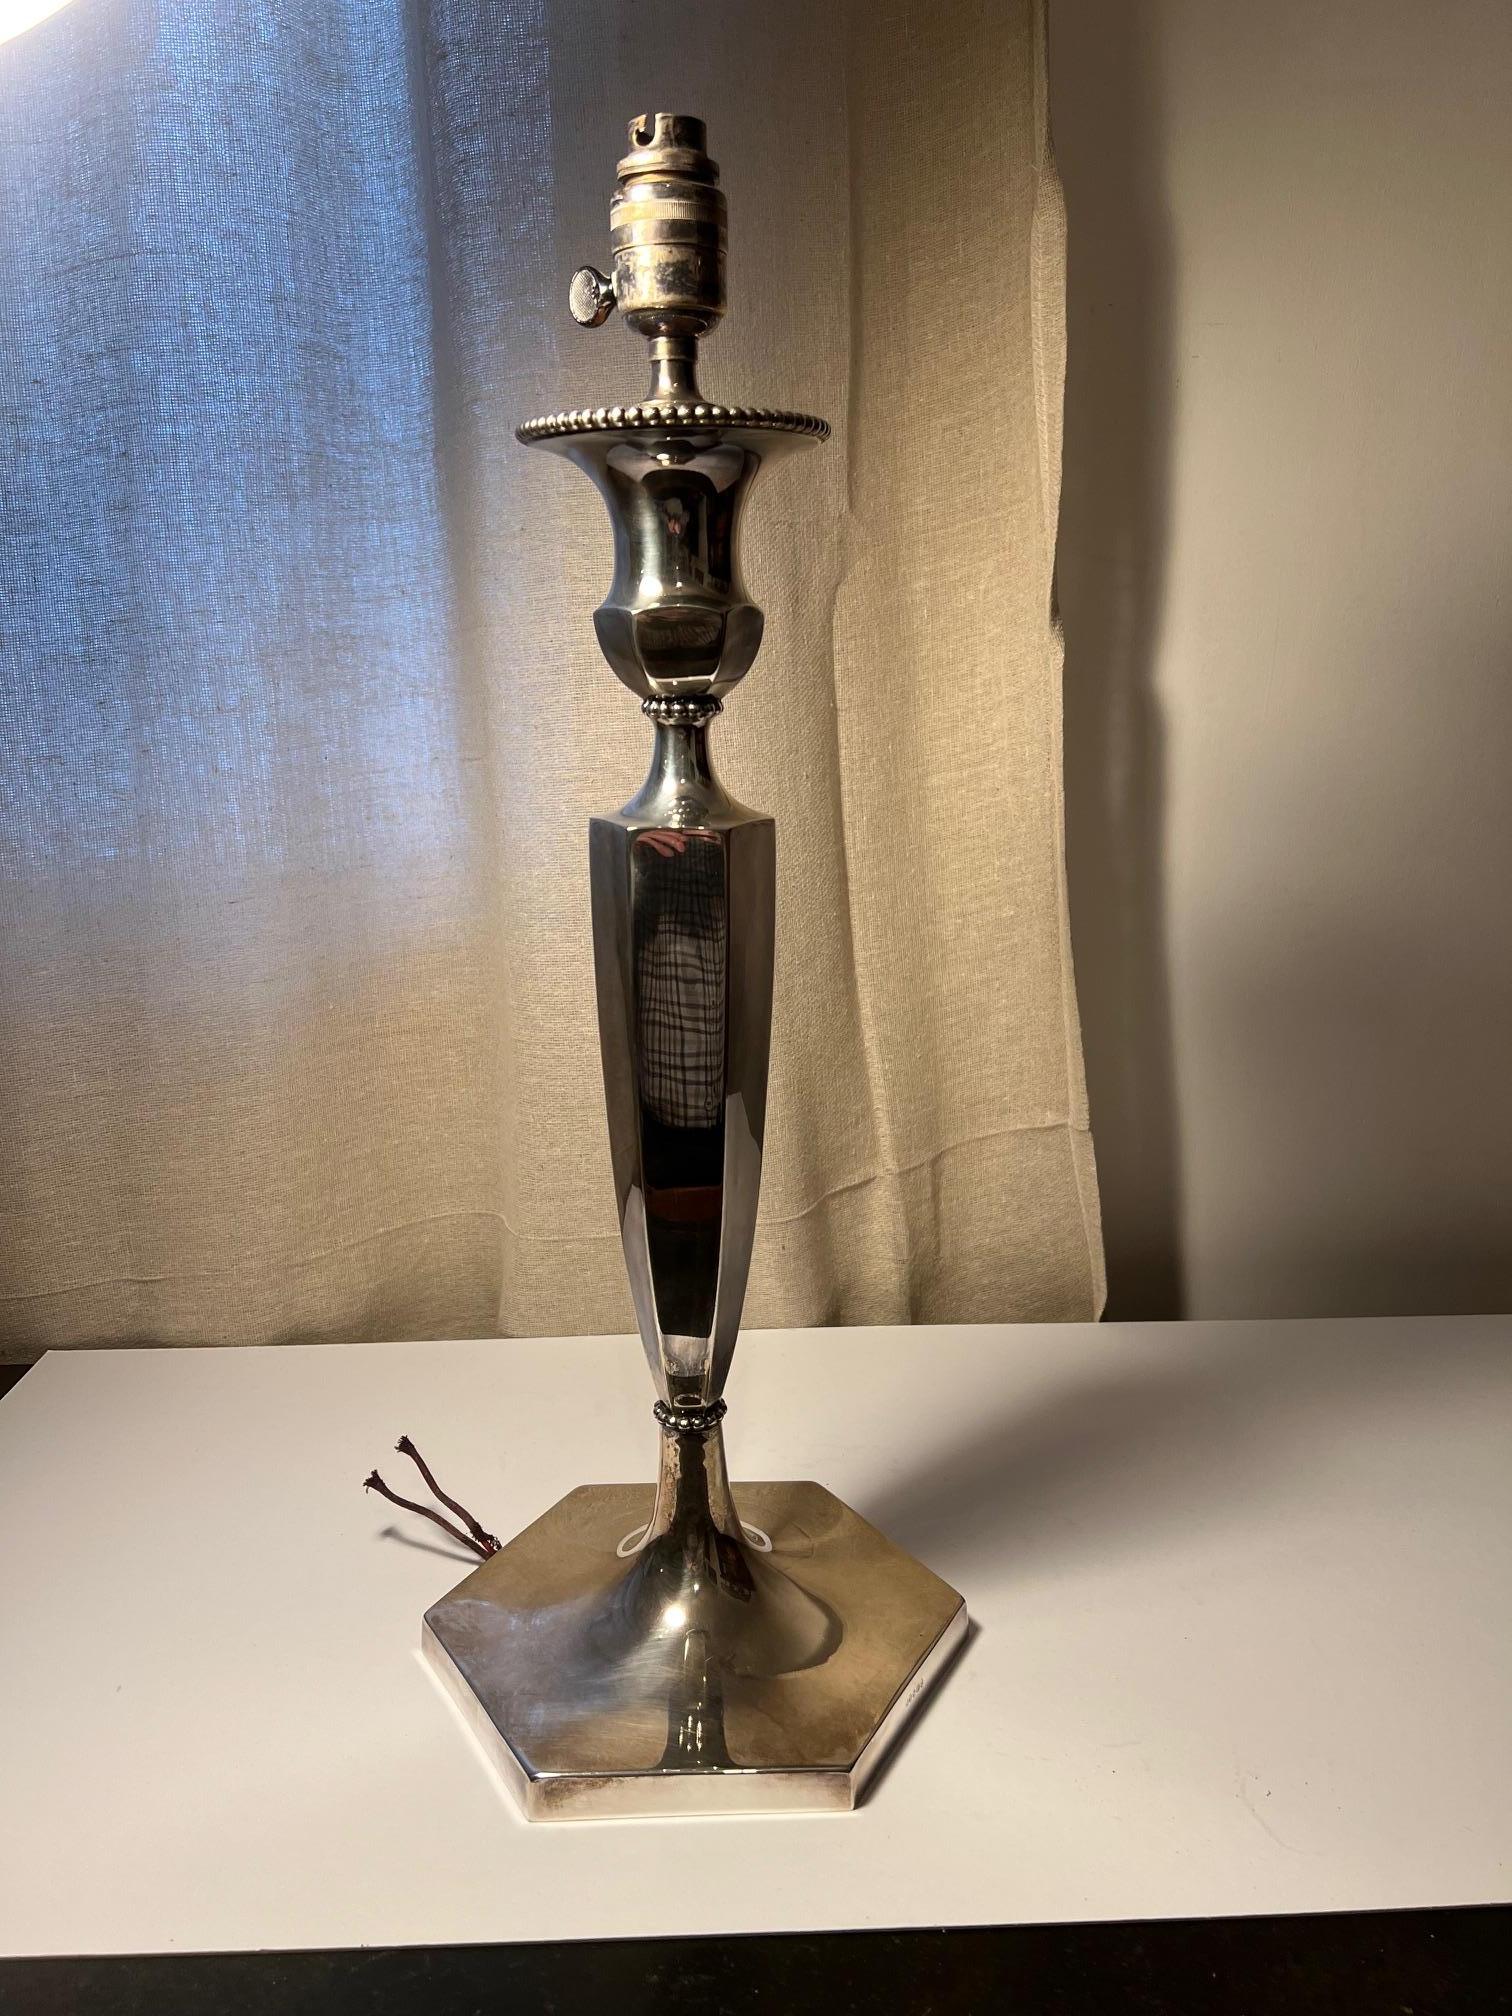 Exceptionally tall & stunning silver plated table lamp to the Edwardian taste.

Marks for Hawksworth Eyre & co, Britannia plate to the base - see photo.

Made directly for electricity. Top quality.

Currently unwired, can be wired for anywhere